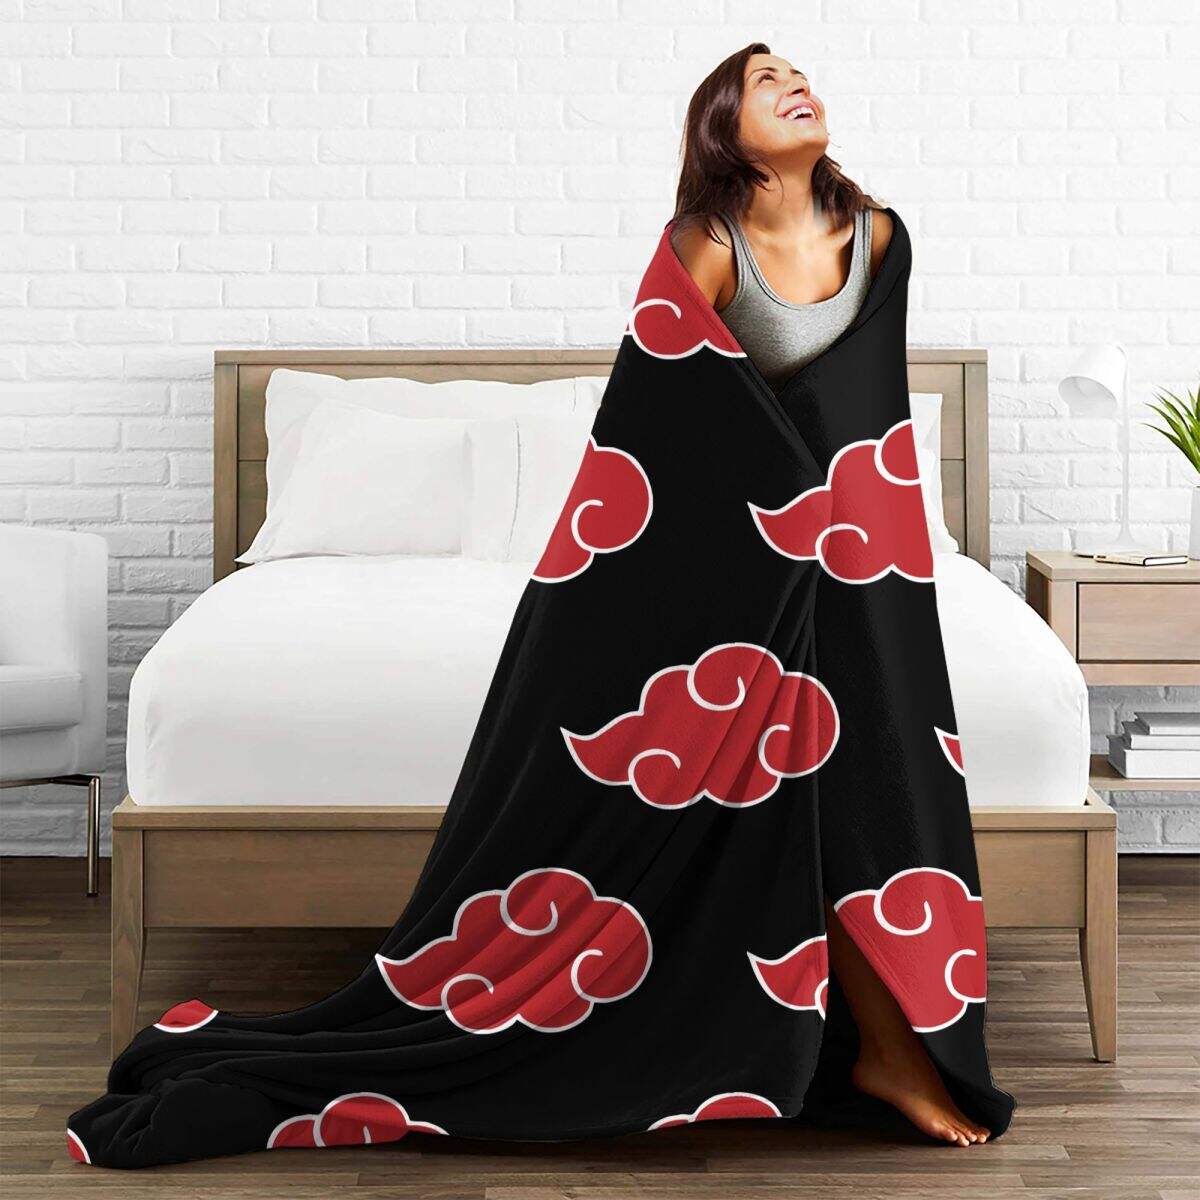 Japan Anime Akatsuki Clouds Blankets Flannel Winter Konoha Neji Breathable Soft Throw Blanket for Sofa Office Quilt Bedspreads 3